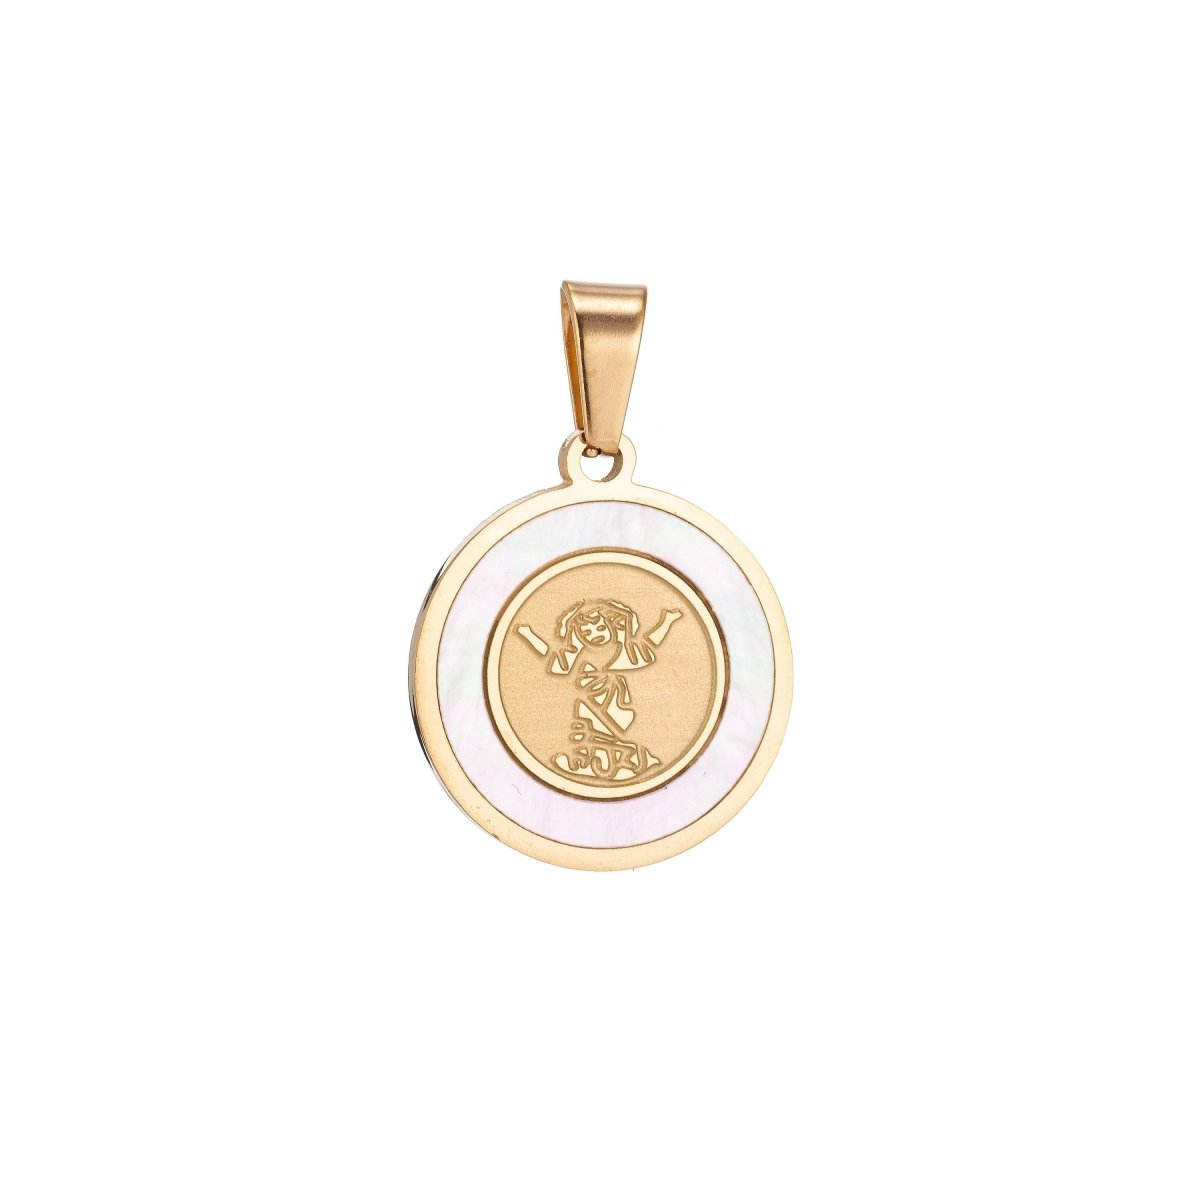 Dainty 18K Gold Filled Divino Nino Medal (Divine Infant Jesus) Coin with Sea Shell Religious Jewelry J-390 - DLUXCA